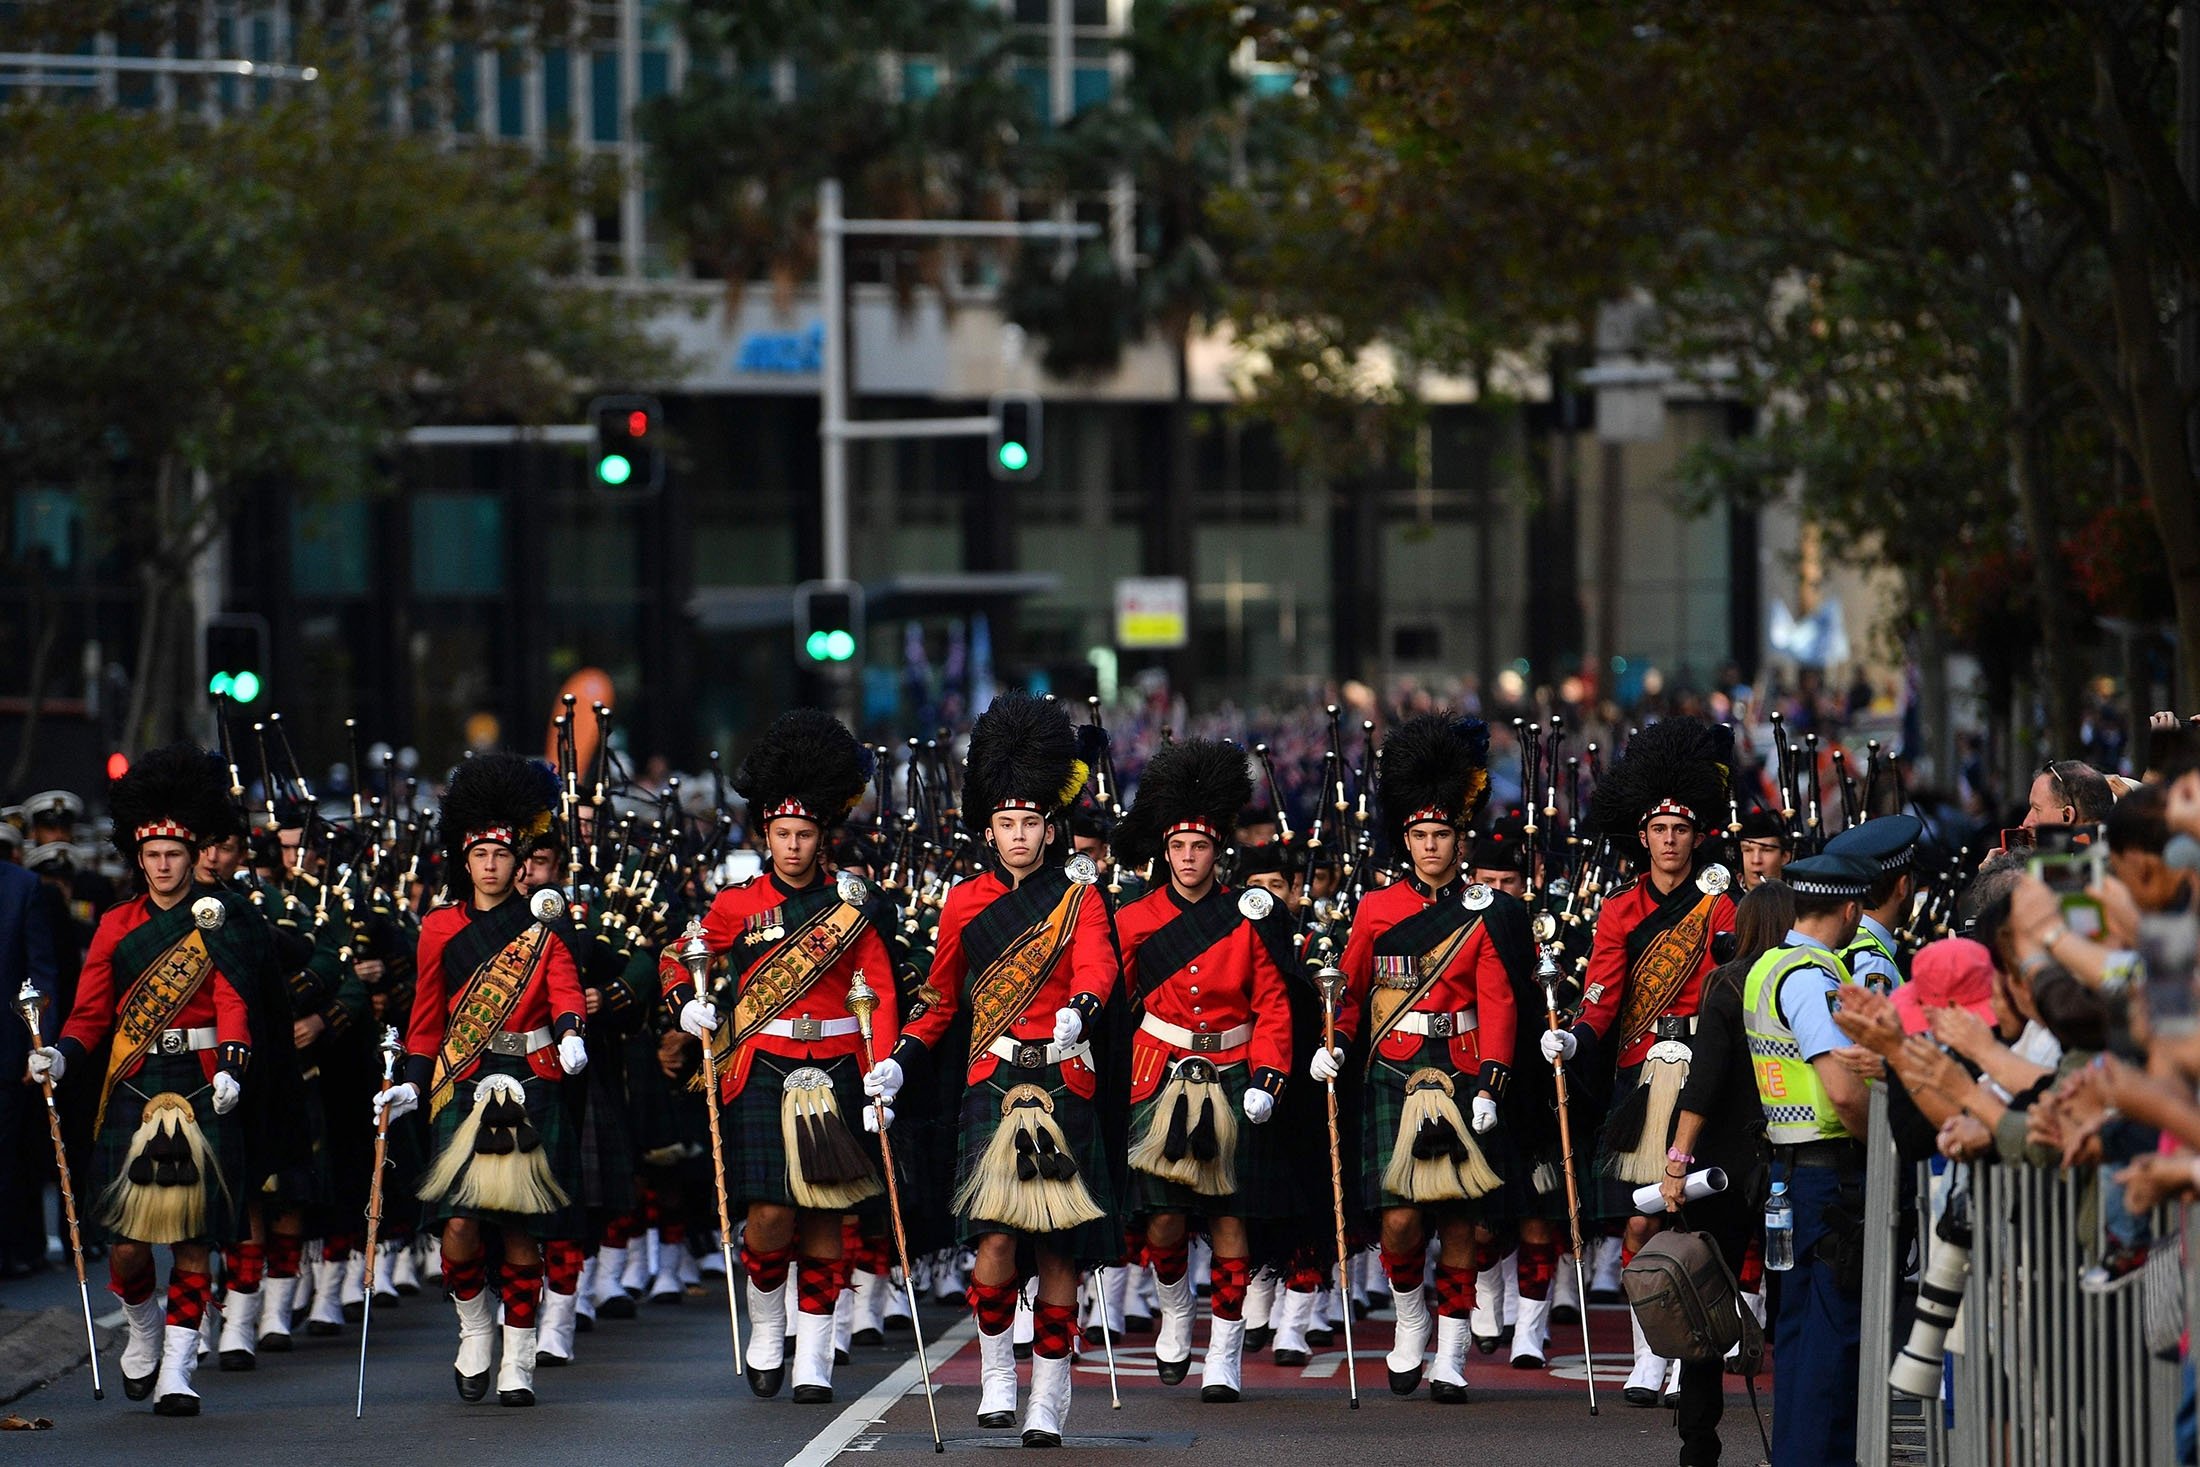 Participants march in the Anzac Day parade in Sydney, Australia, April 25, 2019. (AFP Photo)